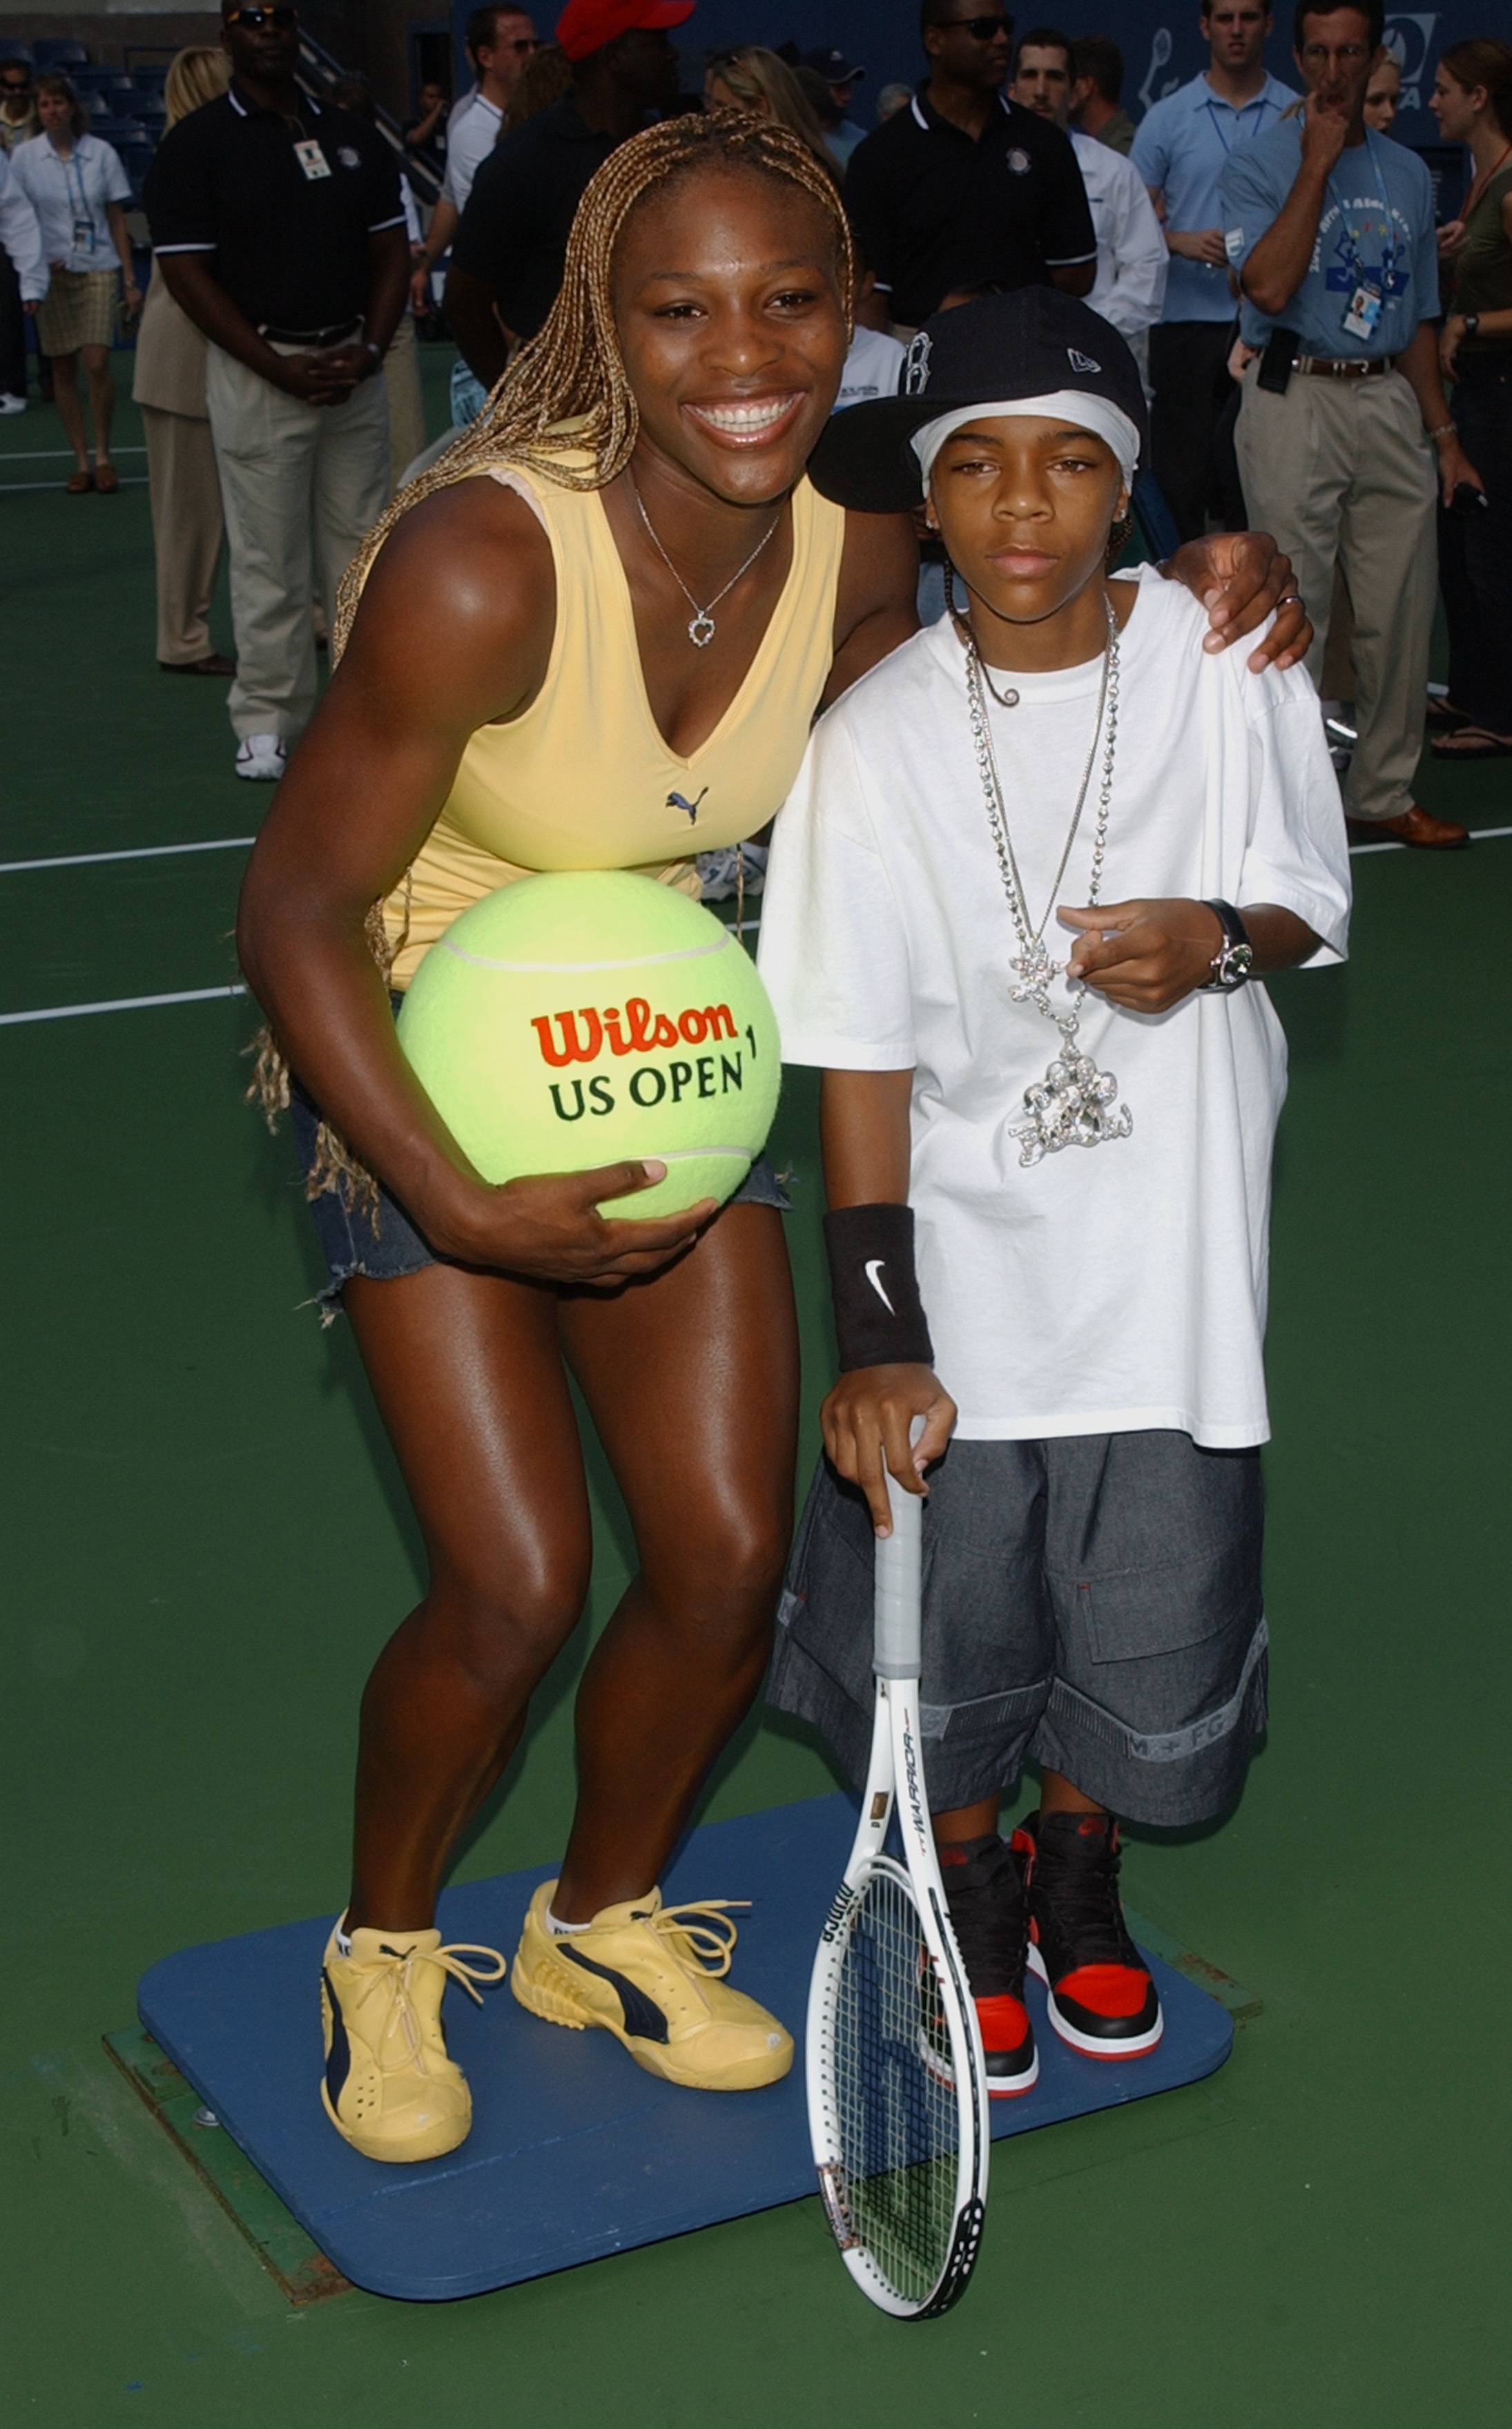 Serena, holding a Wilson US Open ball, smiles as she bends down to take a picture with Lil&#x27; Bow Wow, who&#x27;s holding a tennis racket